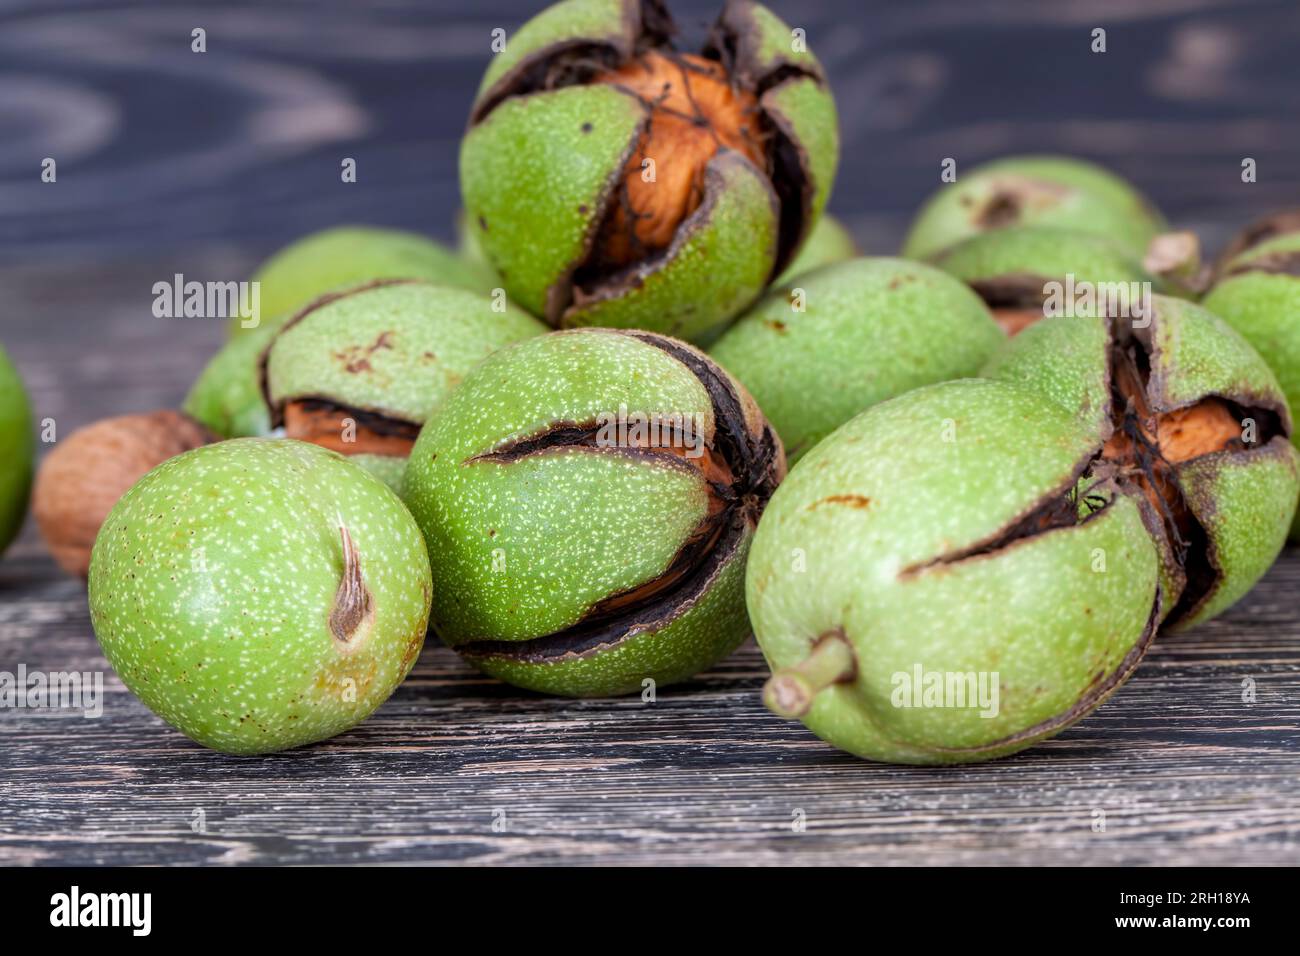 a ripe walnut from which you can get a crop of nuts for nutrition, walnuts harvested and preparing it for drying Stock Photo